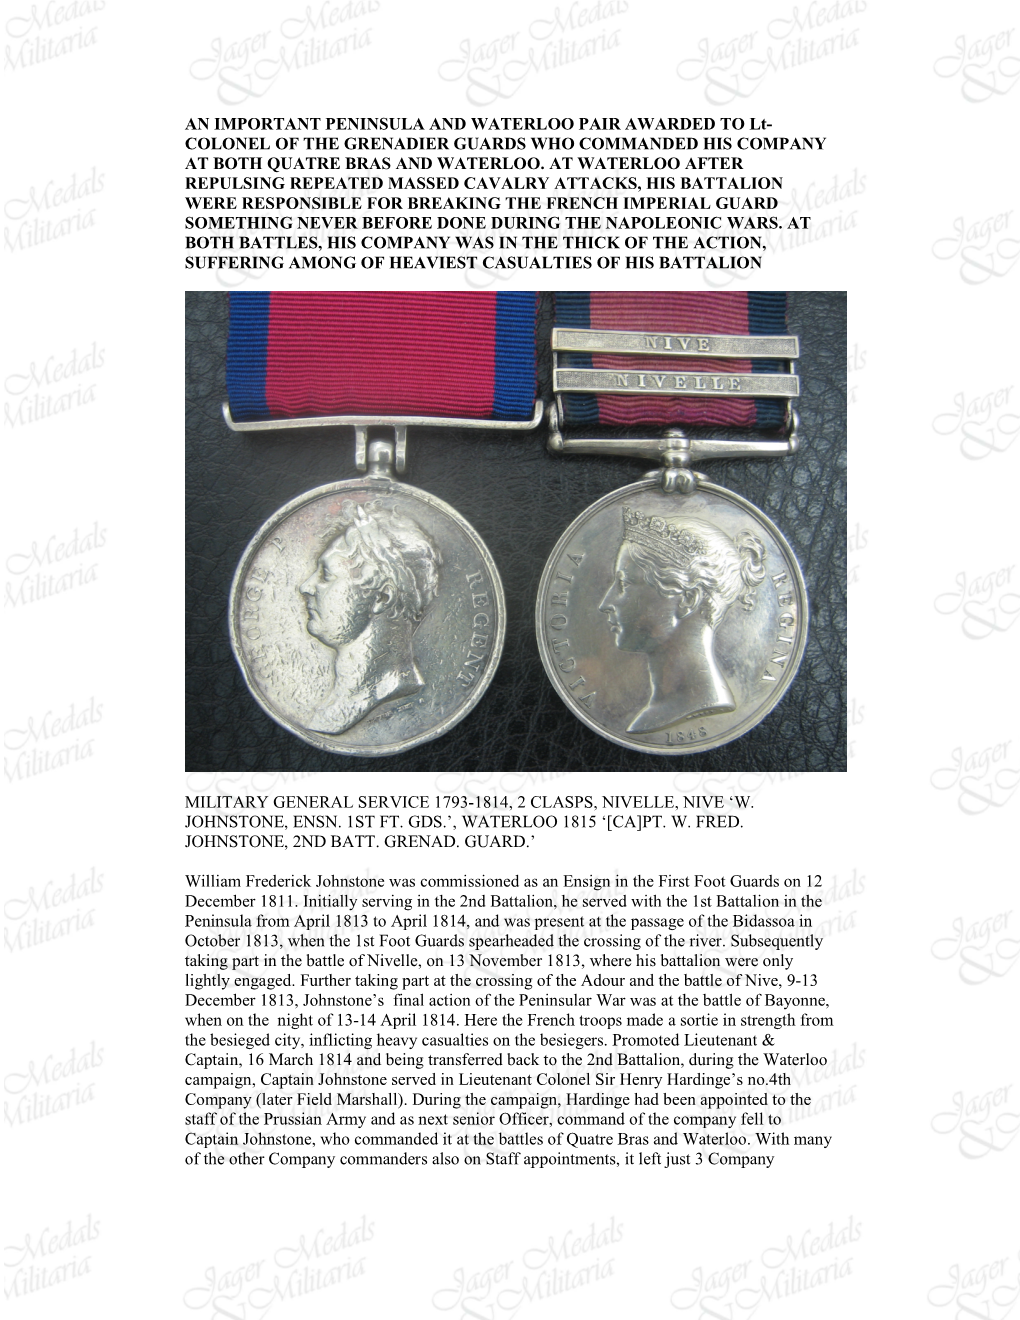 AN IMPORTANT PENINSULA and WATERLOO PAIR AWARDED to Lt- COLONEL of the GRENADIER GUARDS WHO COMMANDED HIS COMPANY at BOTH QUATRE BRAS and WATERLOO